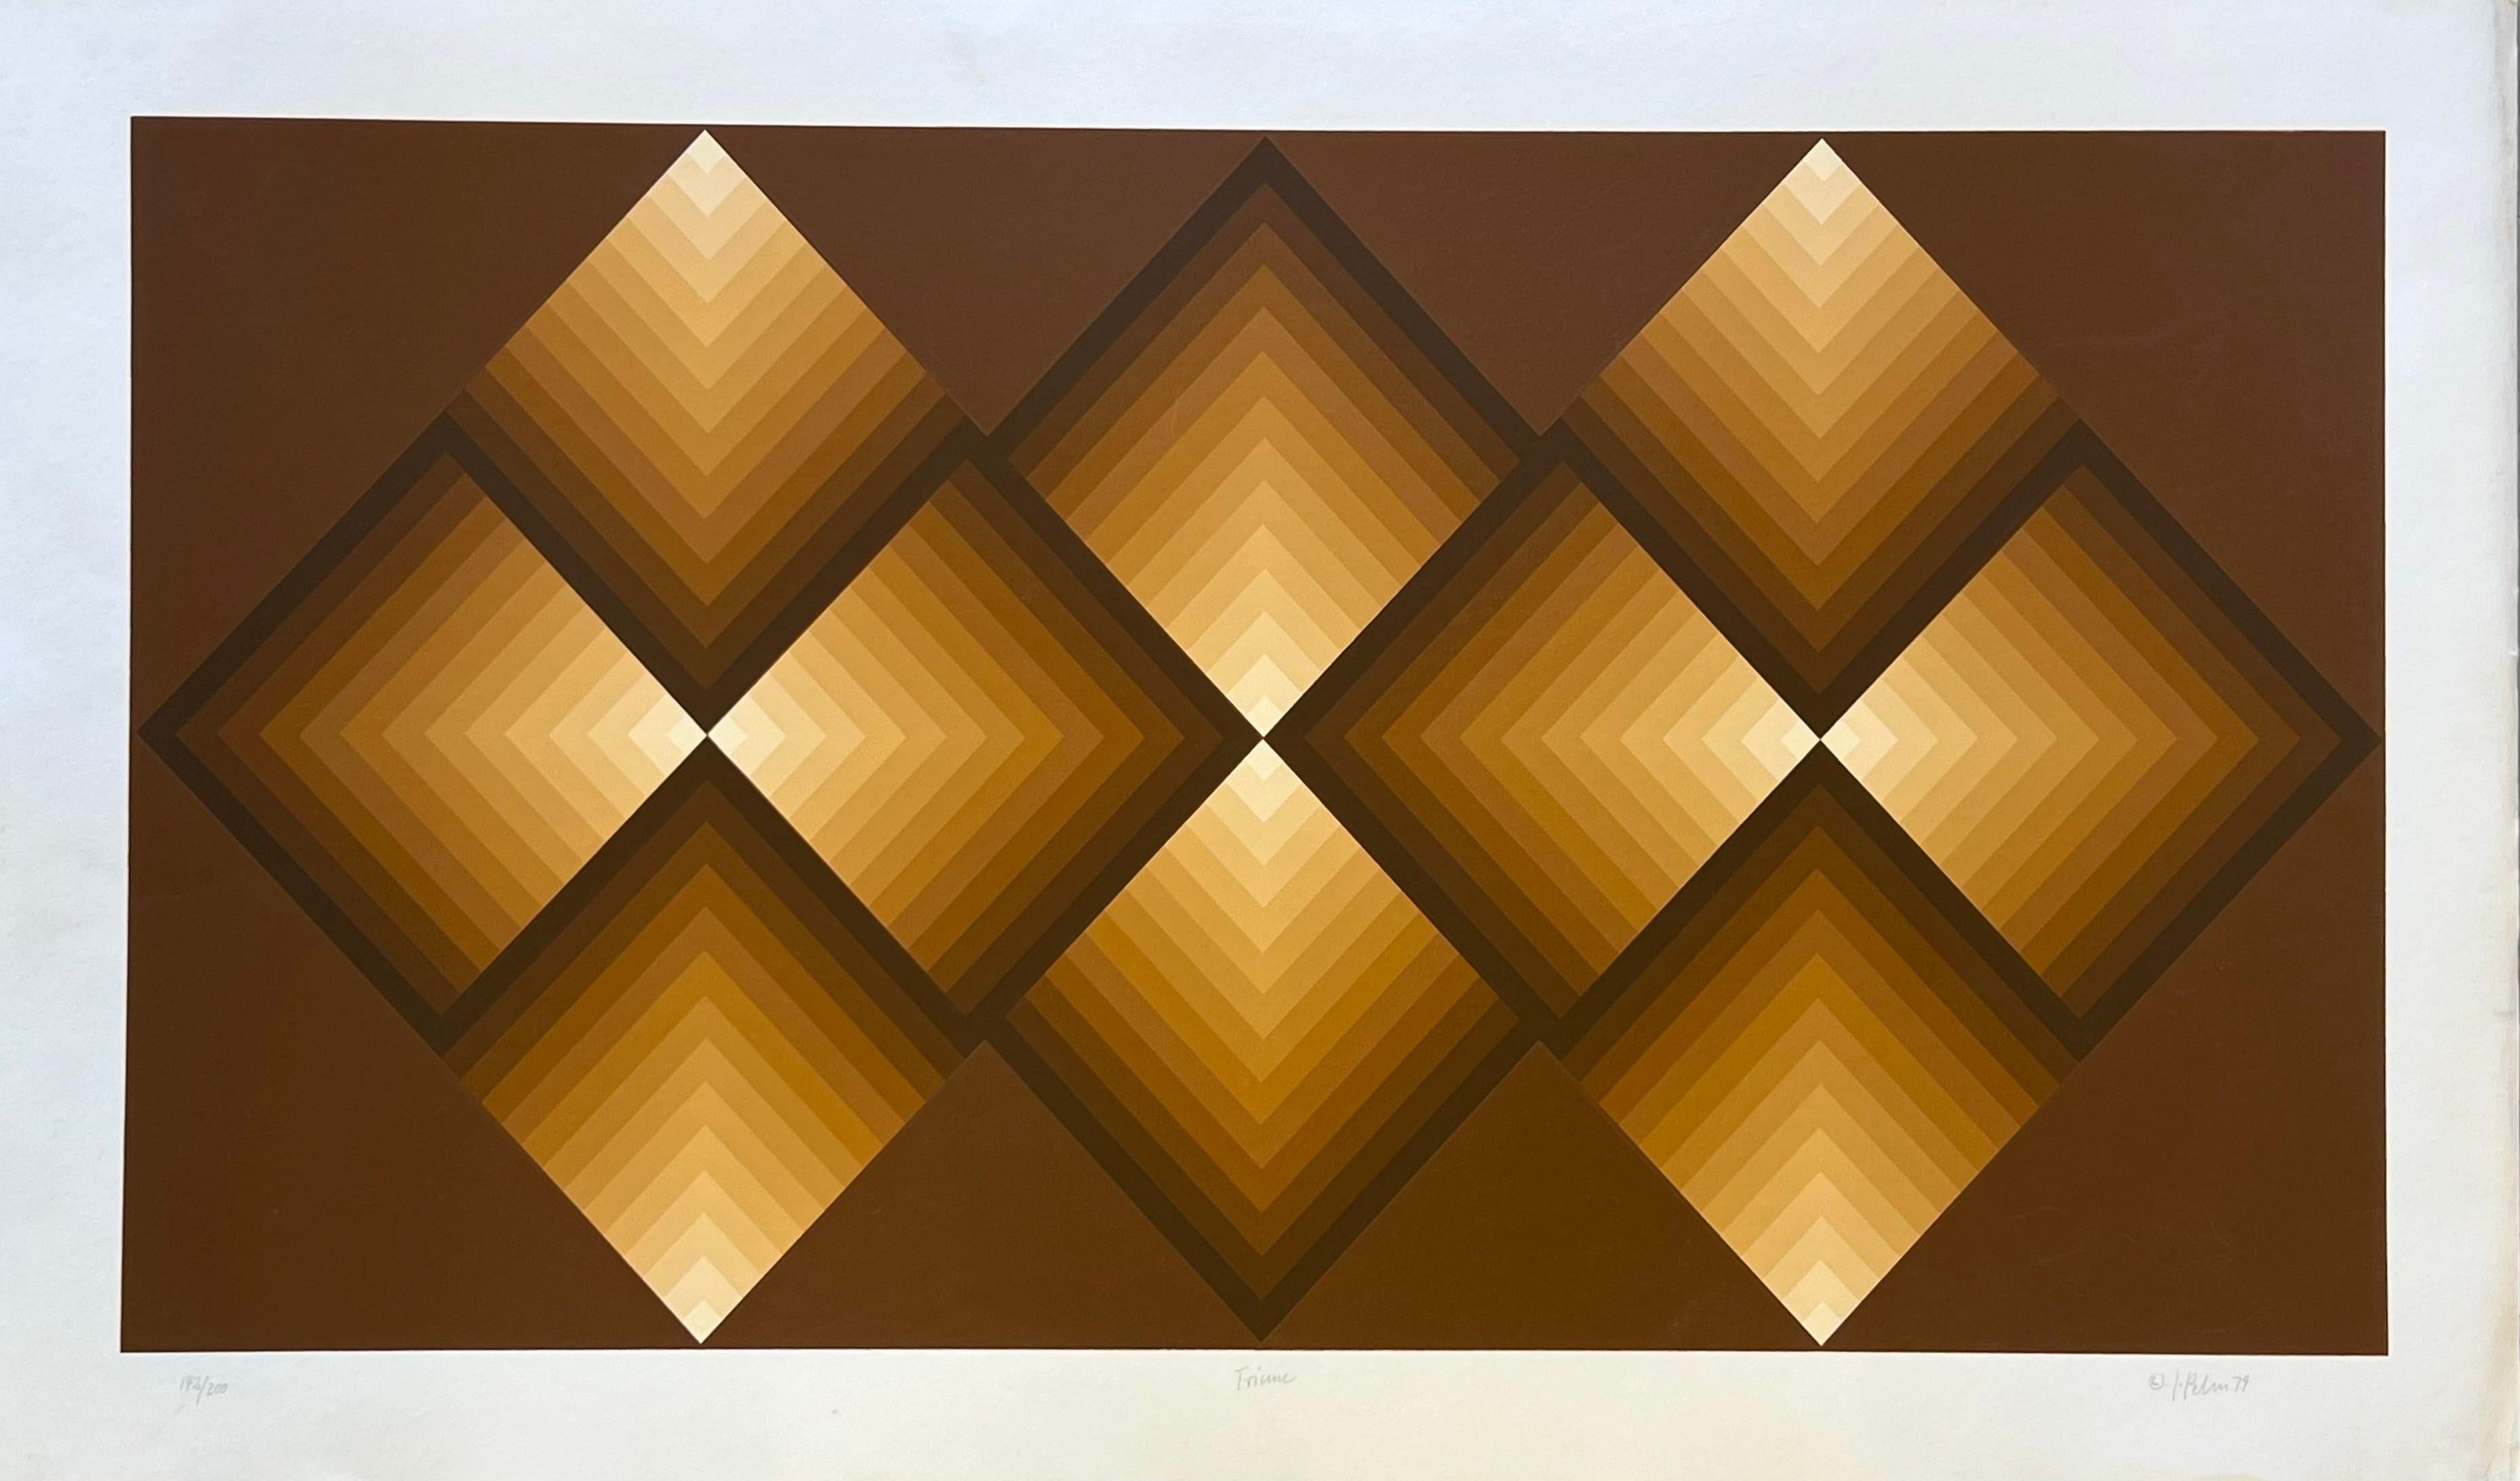 Original 1979 screen print numbered 142/200. Signed by artist Jurgen Peters and entitled Trieme. Jurgen Peters was born in 1936 in Hamburg Germany. He was a very well known optical artist in the 1970s, he was a known contemporary of Victor Vasarely,